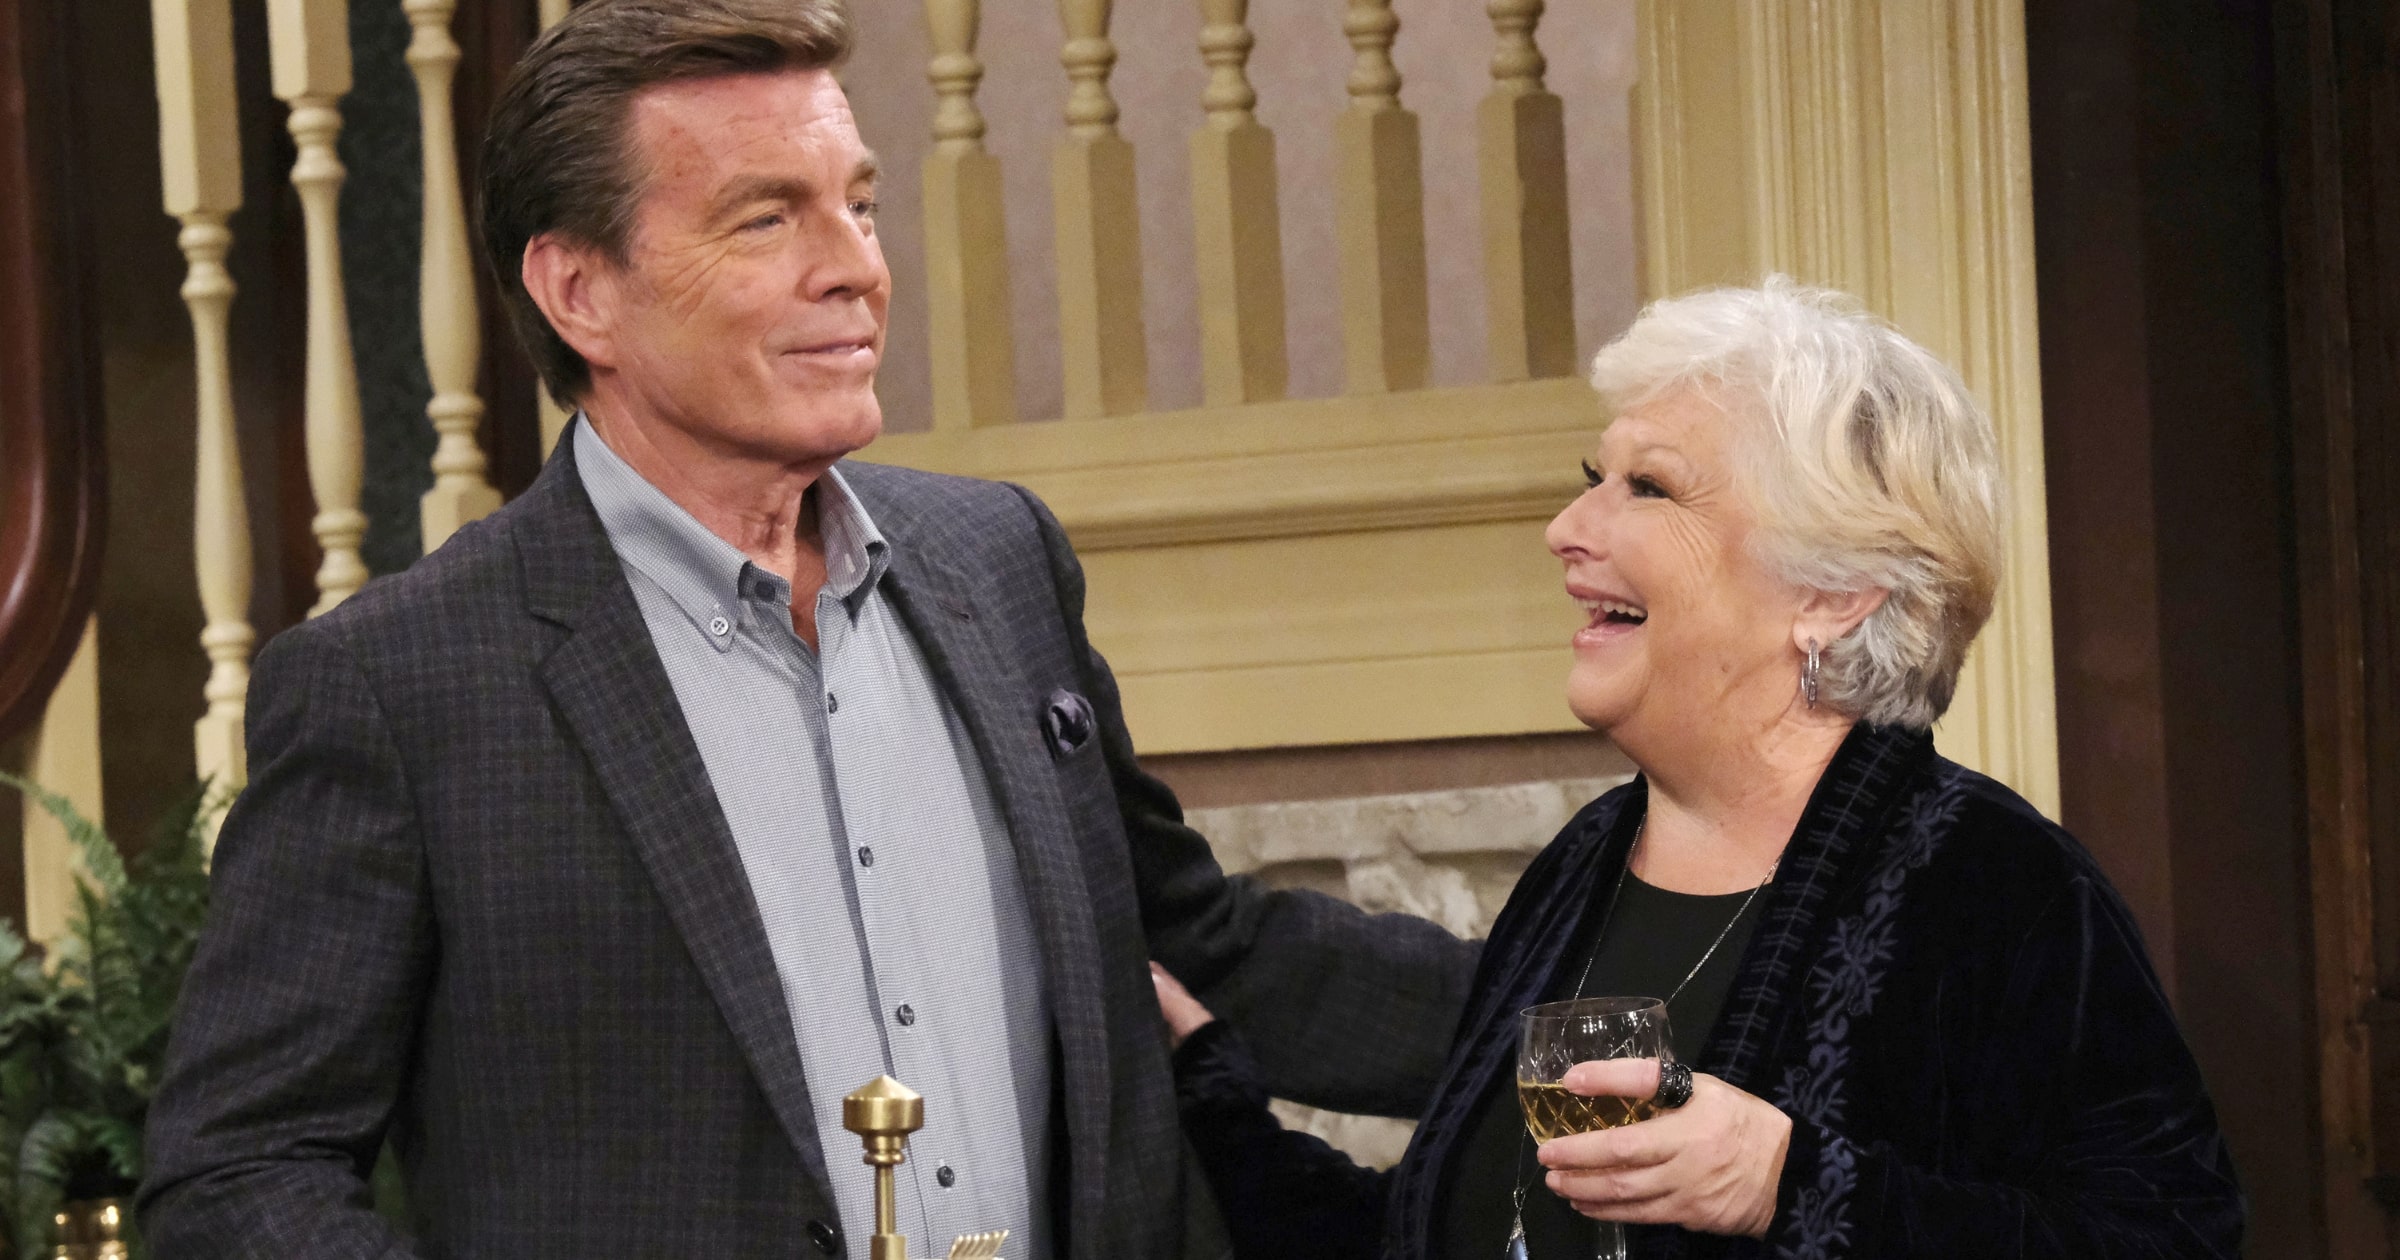 The Young and the Restless - Nov 22 - Jack and Traci